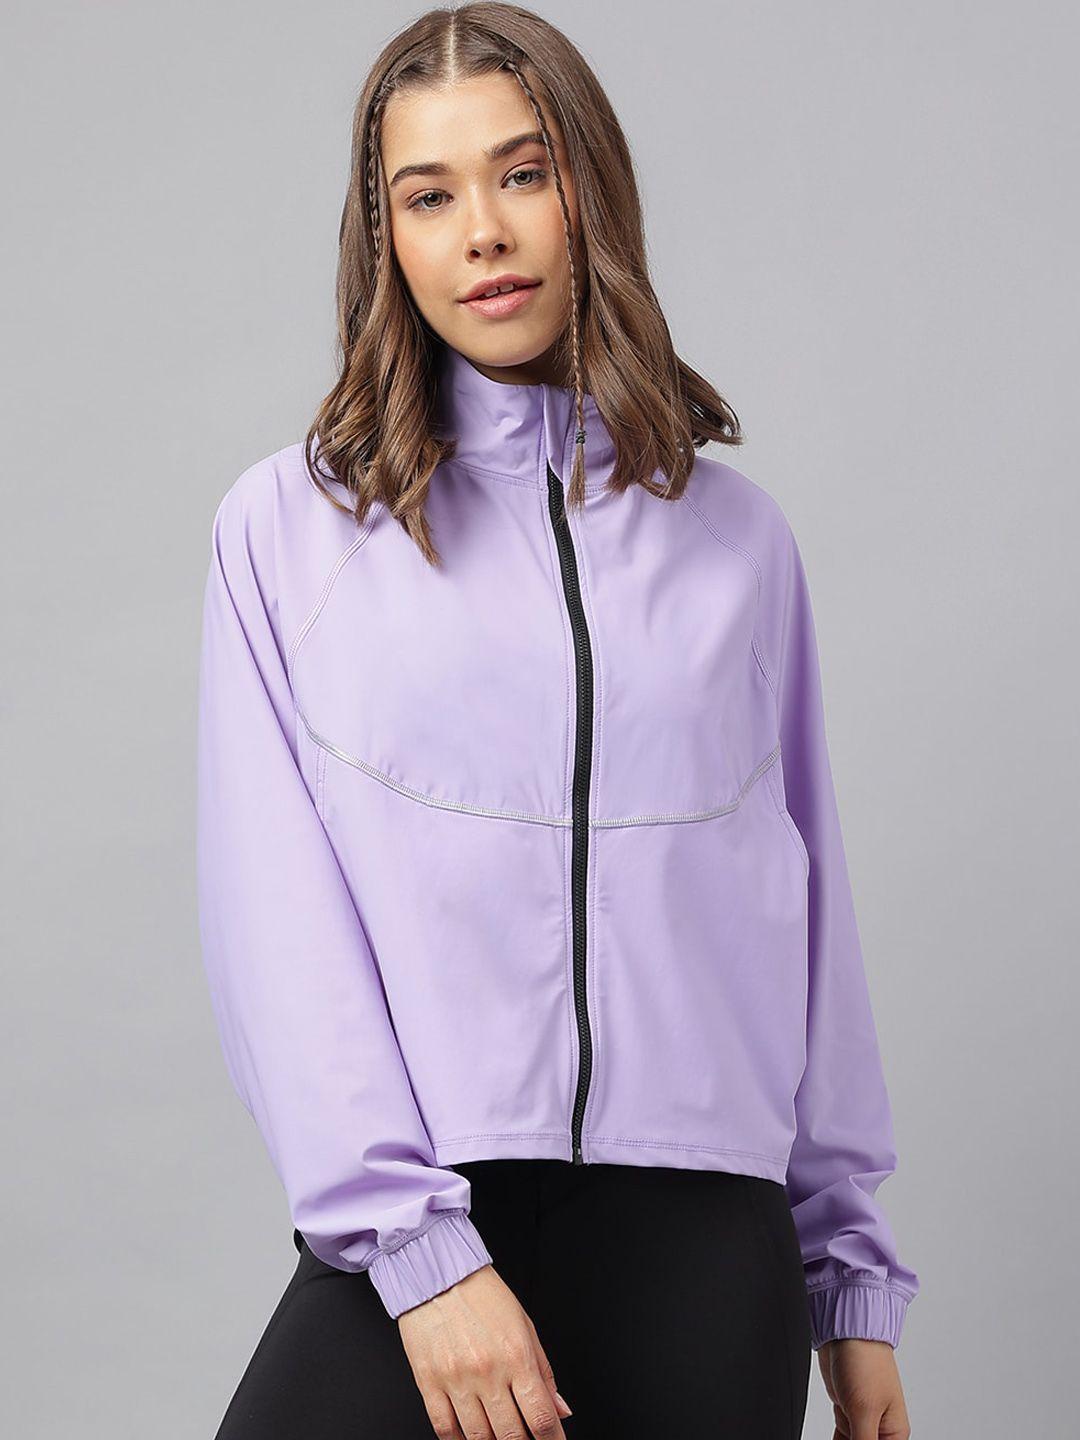 fitkin lightweight mock collar reflective detail anti odour sporty jacket